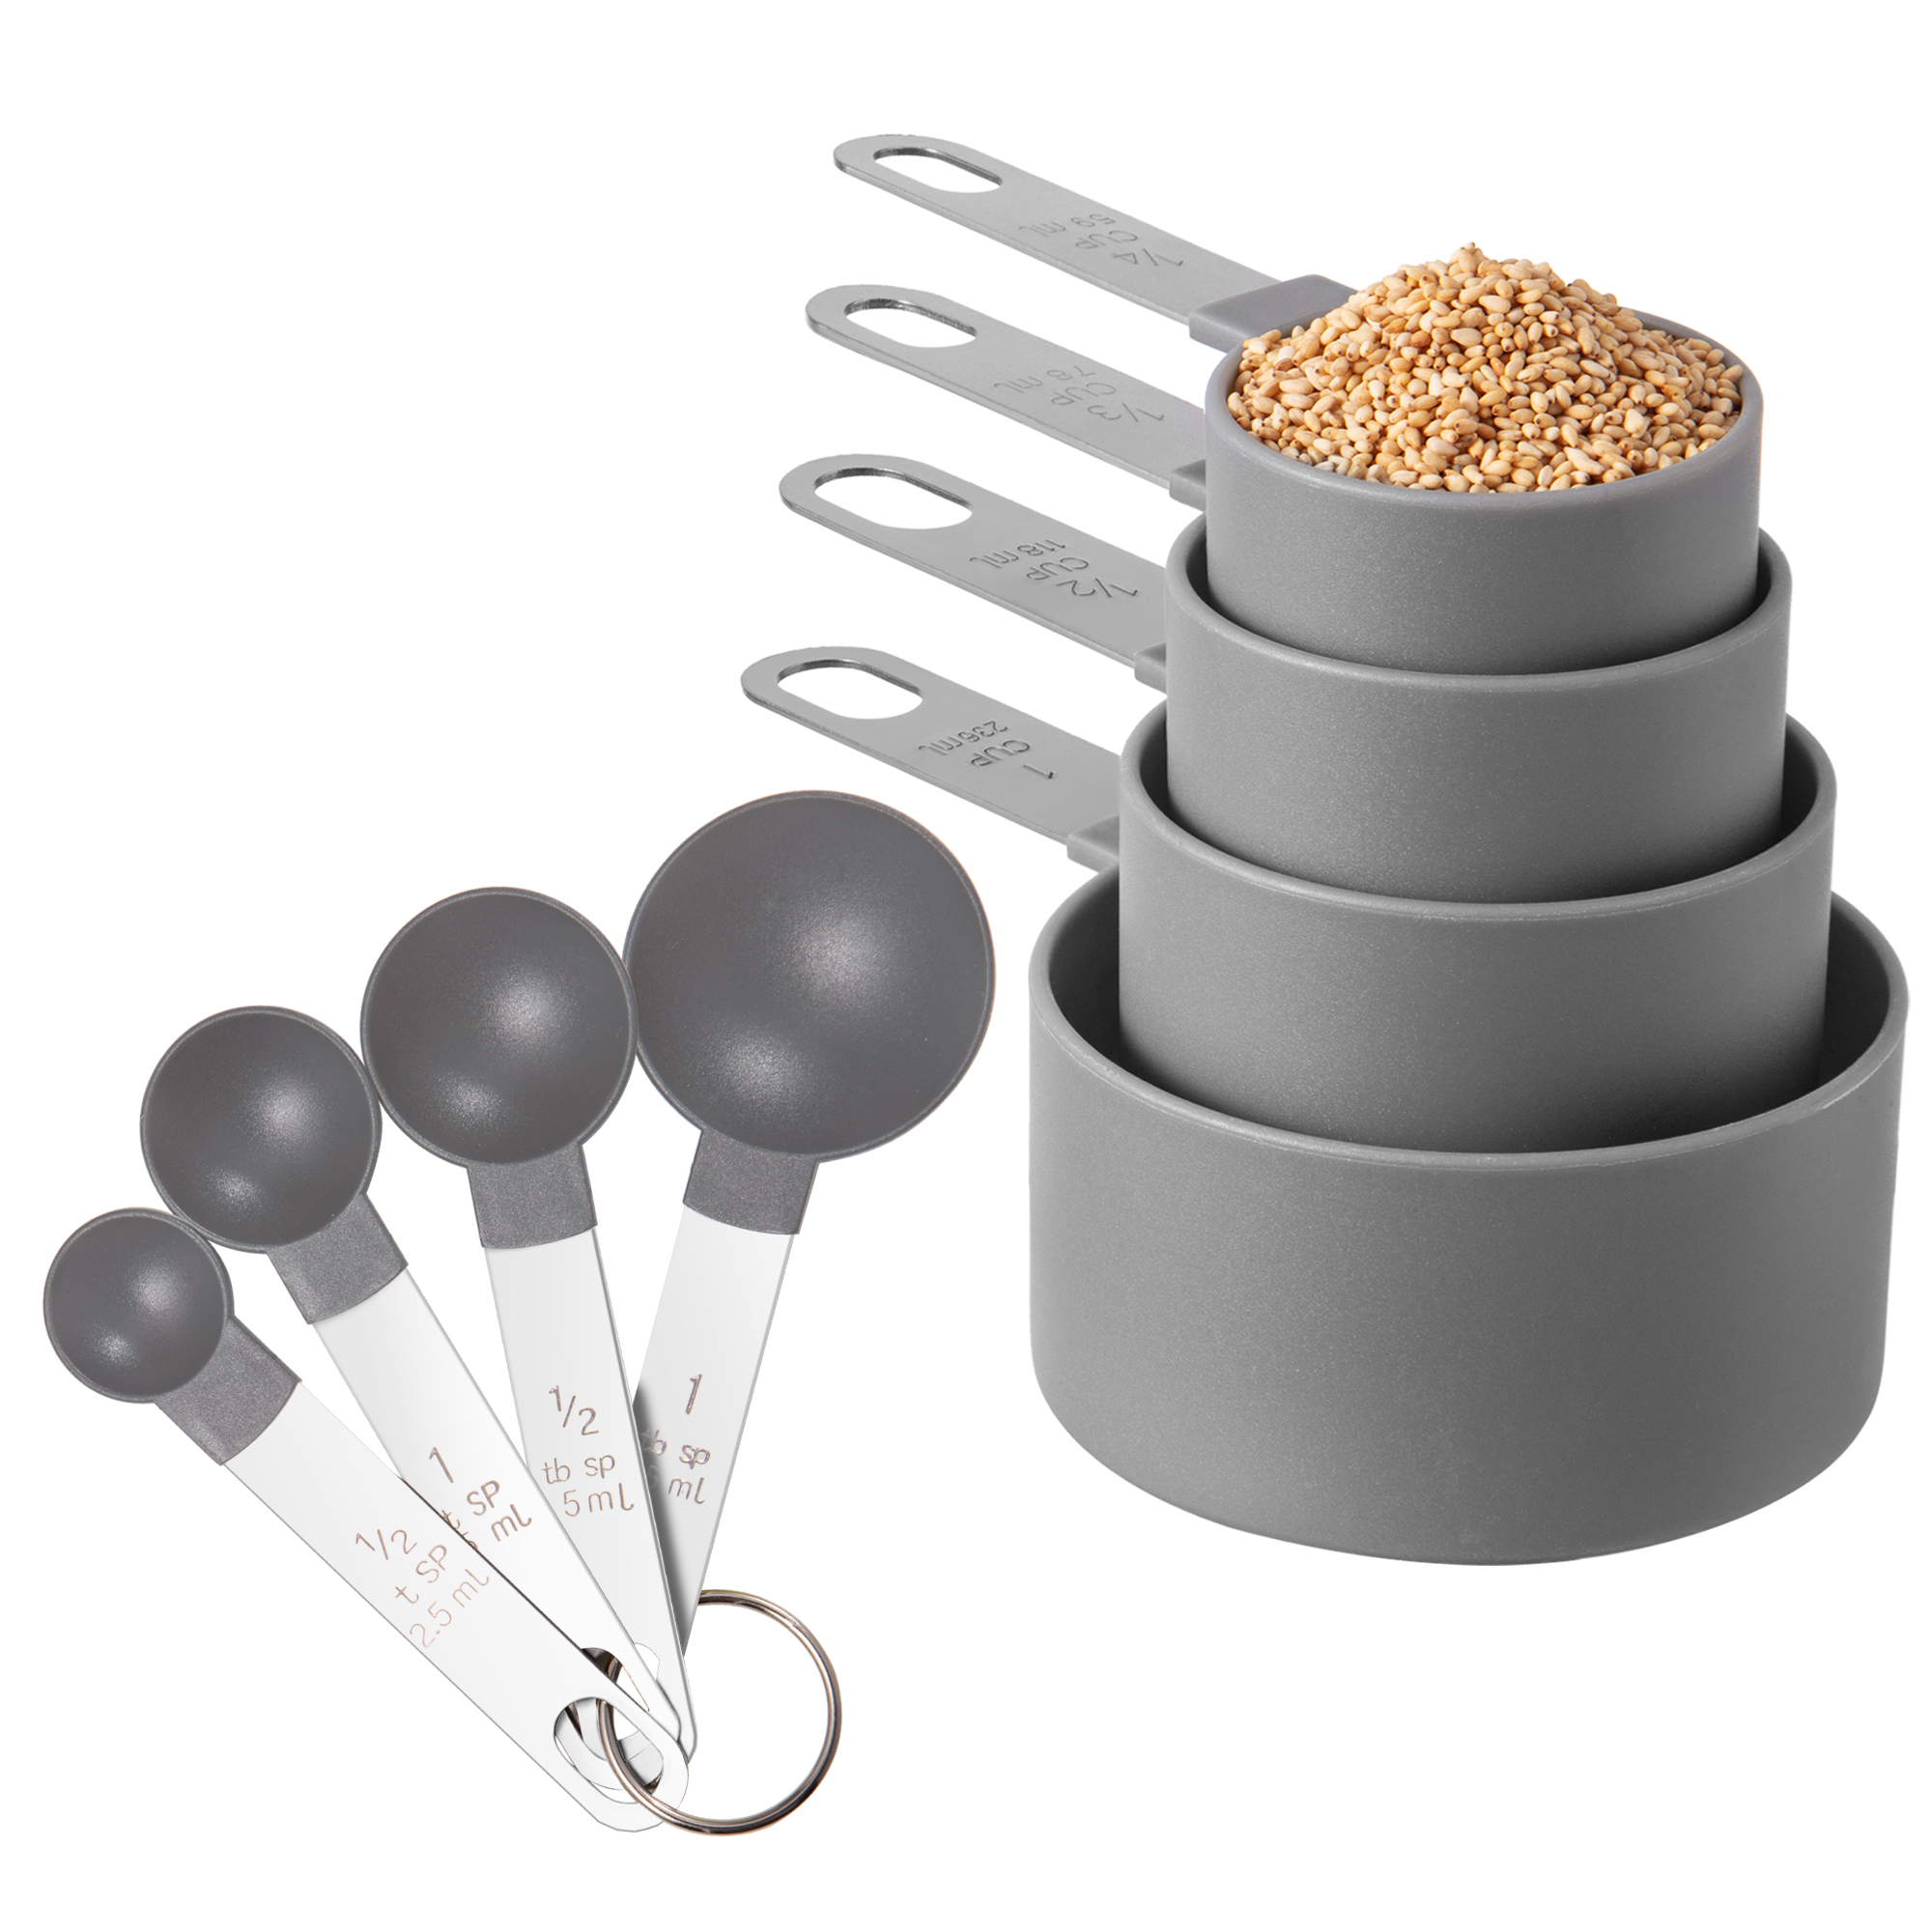 8Pcs/Set Measuring Cups And Spoons 8 Piece Stackable Stainless Steel Handle  Accurate Tablespoon For Measuring Dry And Liquid Ingredients Small Teaspoon  With Plastic Head